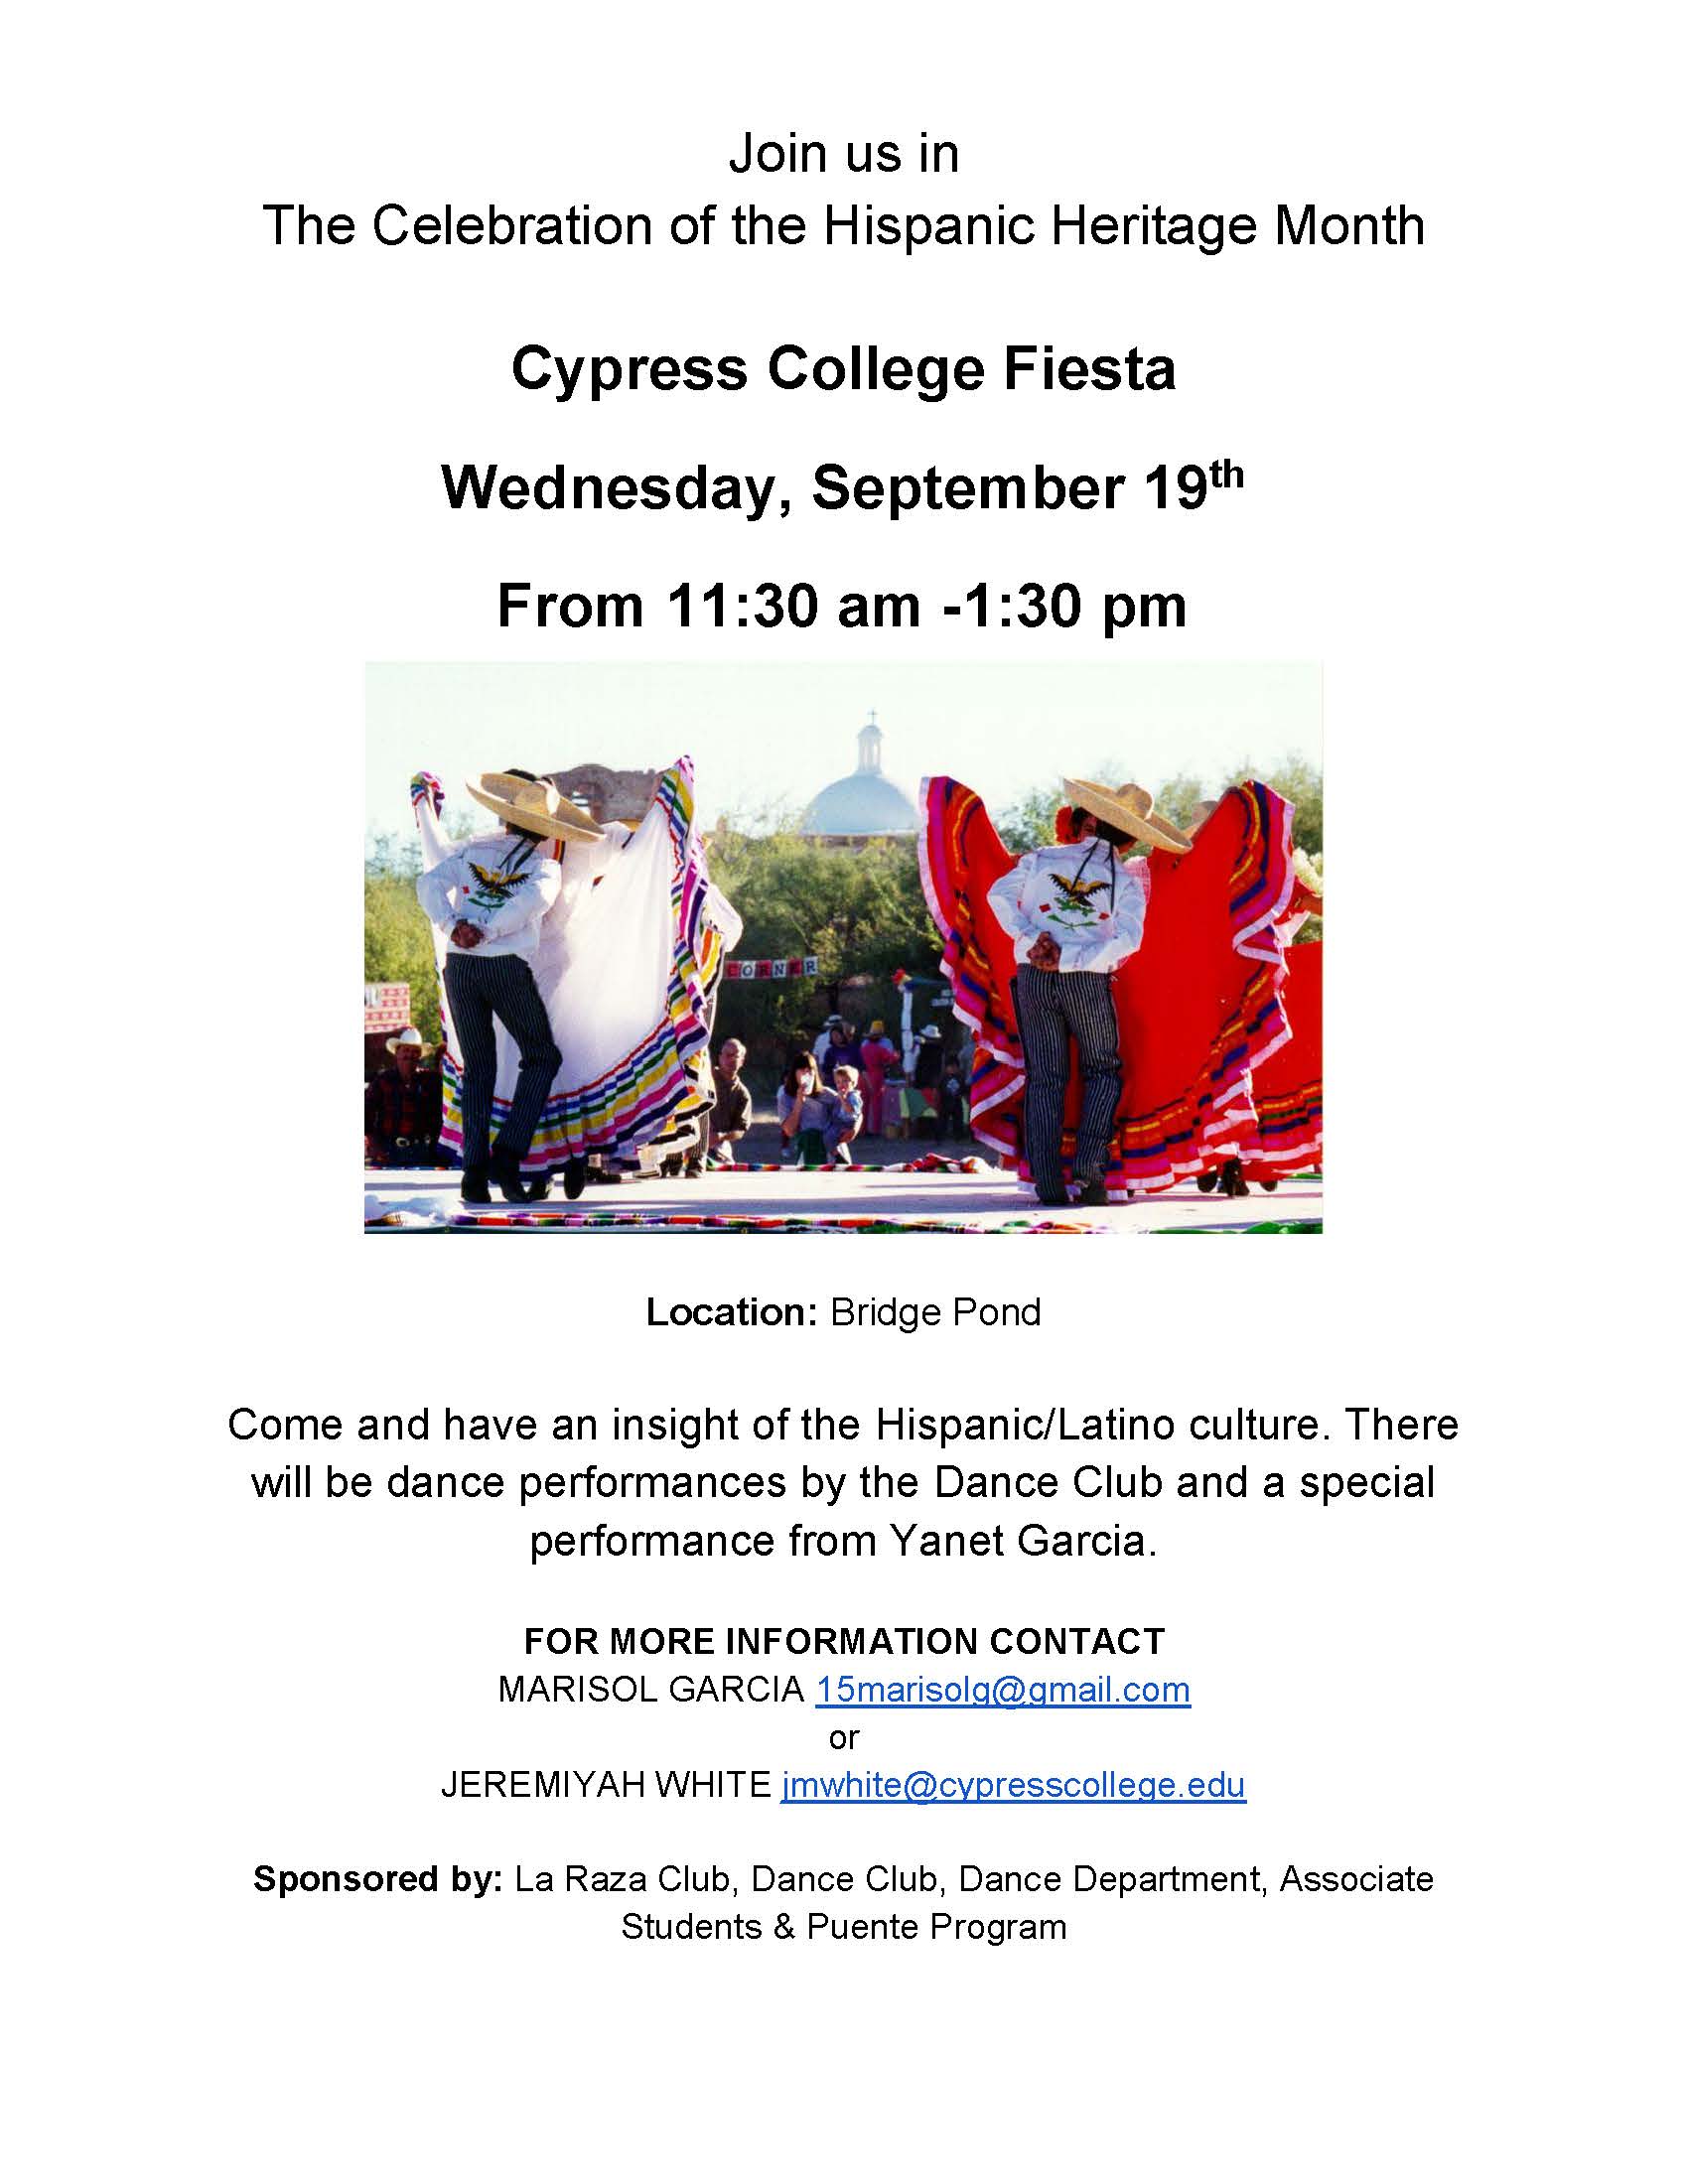 Heritage Month Fiesta flyer showing an image of Mexican folklorico dancers.